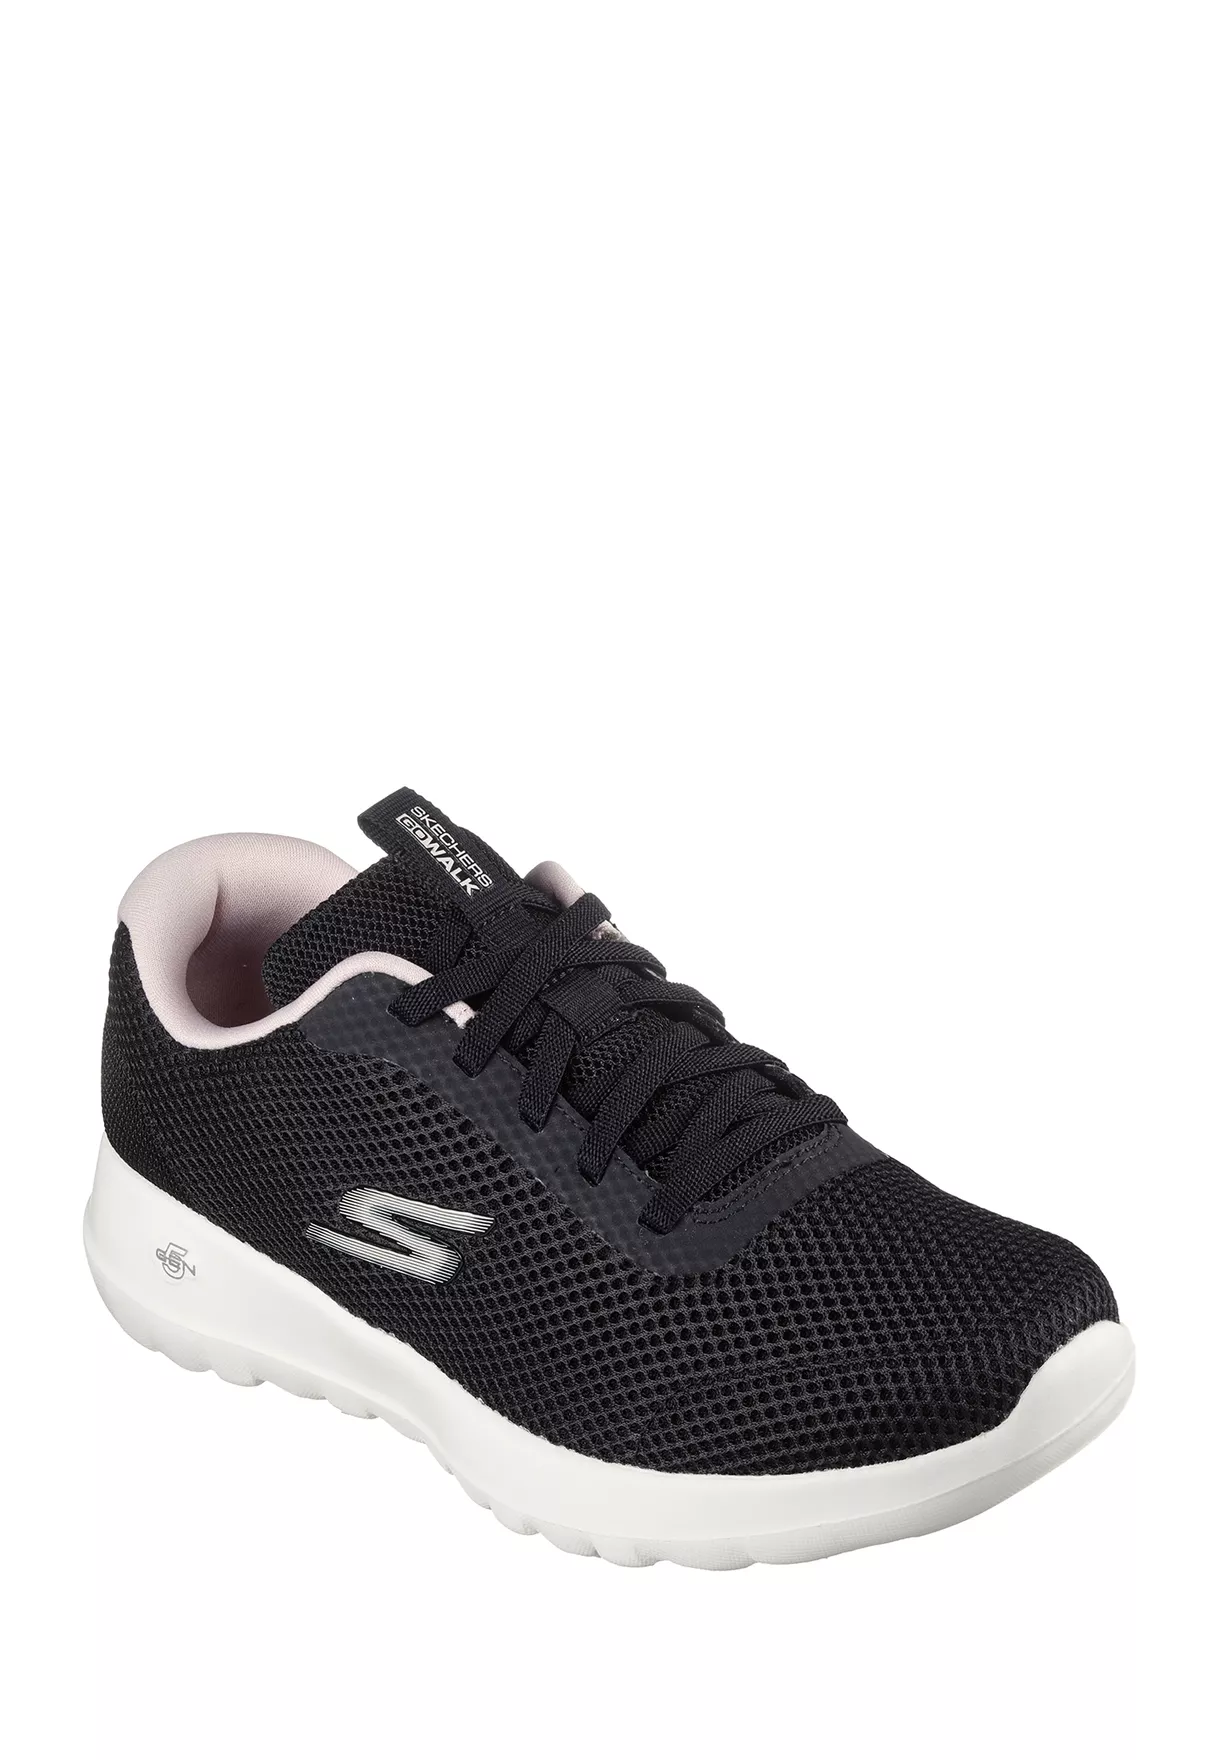 Skechers KSA Coupon: 20% Off On Your Favorite Shoes